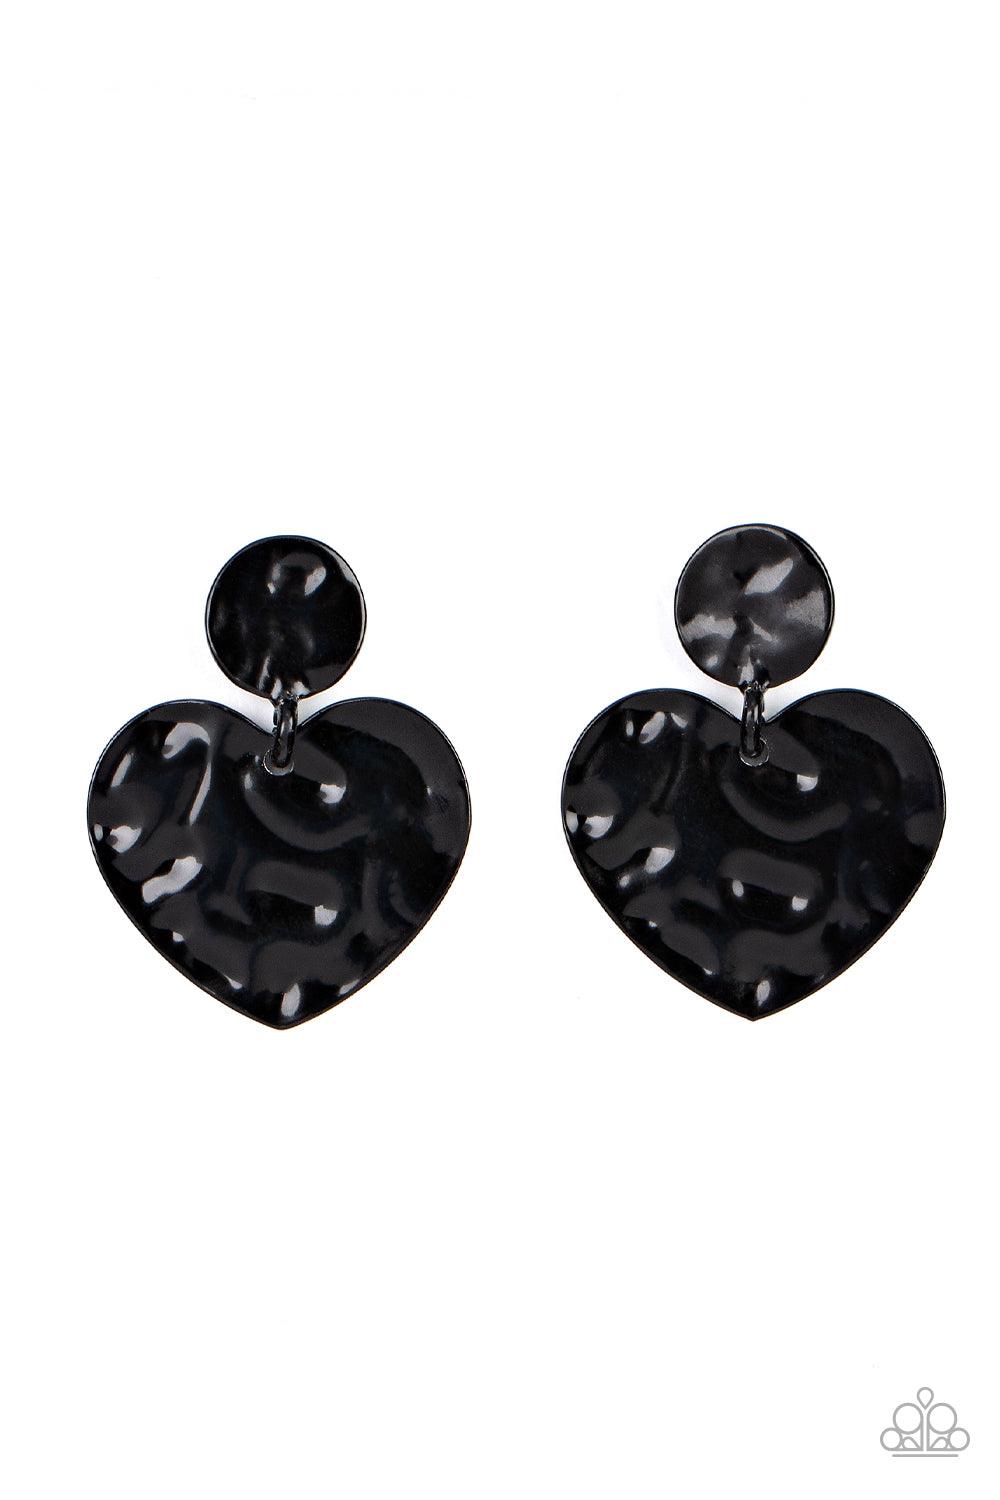 Paparazzi Accessories Just a Little Crush - Black Painted in a glossy black finish, a hammered disc gives way to a hammered heart frame for a flirtatious fashion. Earring attaches to a standard post fitting. Sold as one pair of post earrings. Jewelry